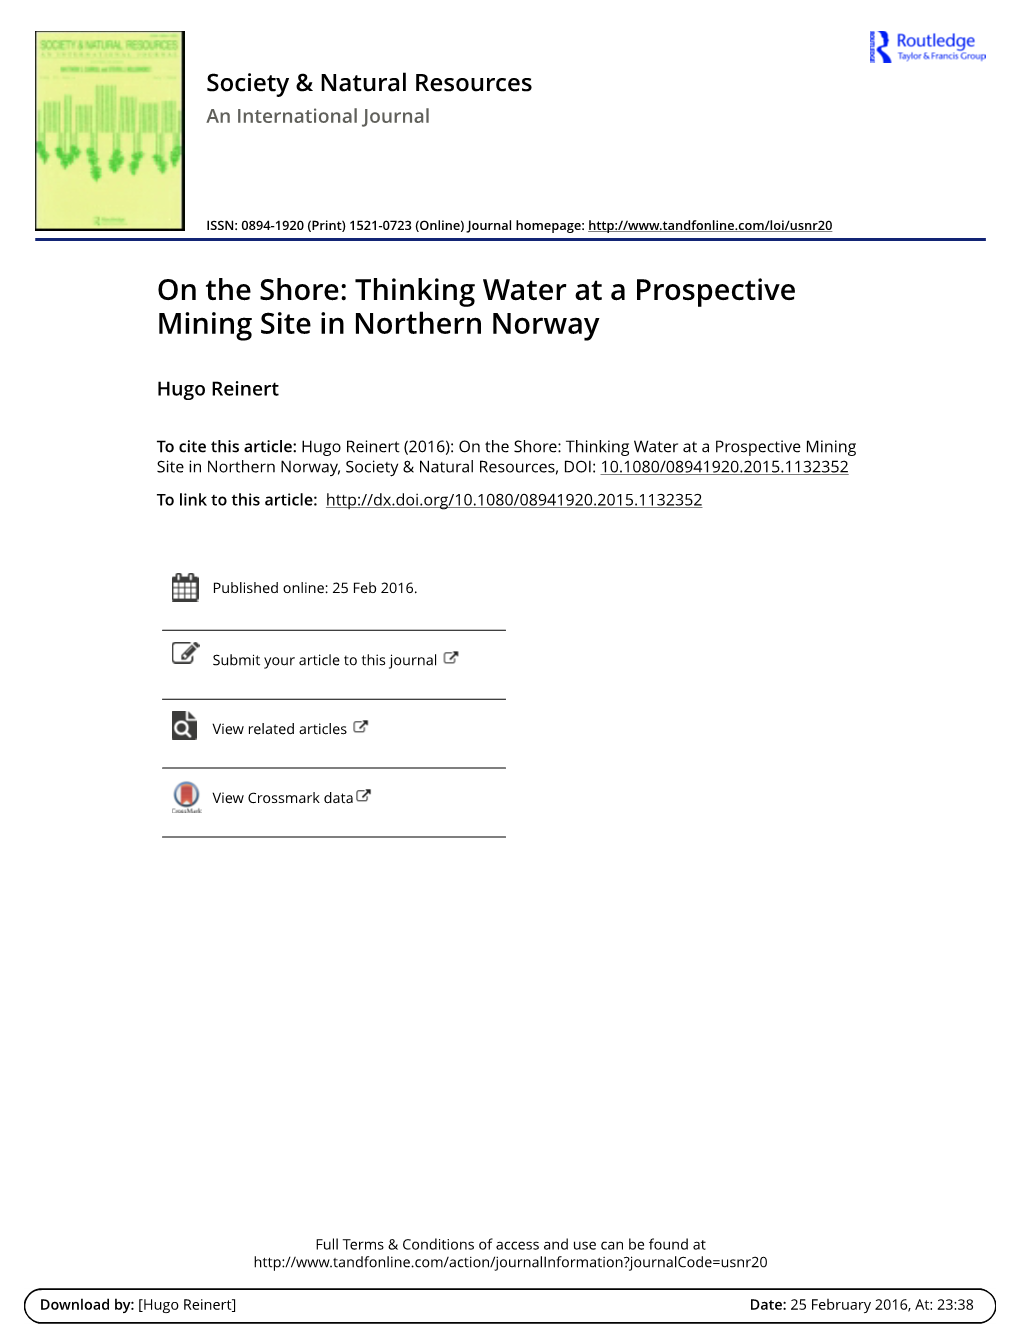 On the Shore: Thinking Water at a Prospective Mining Site in Northern Norway